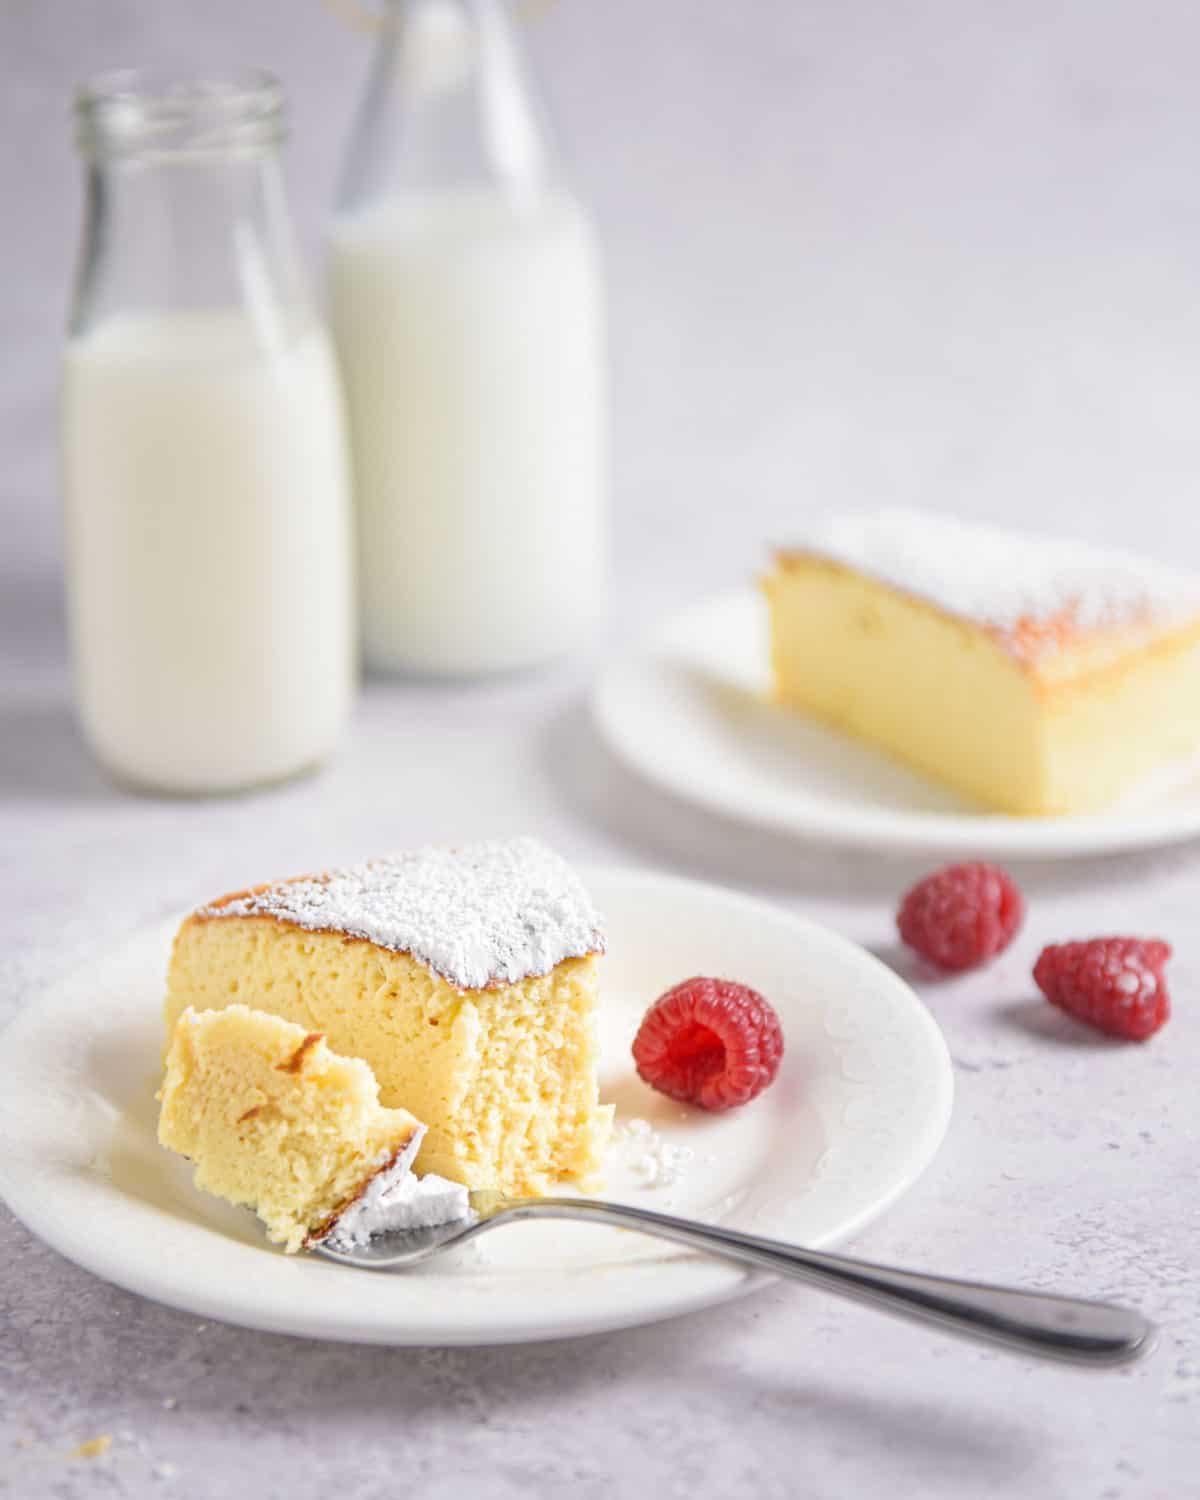 A slice of cheesecake on a plate with milk in the background.